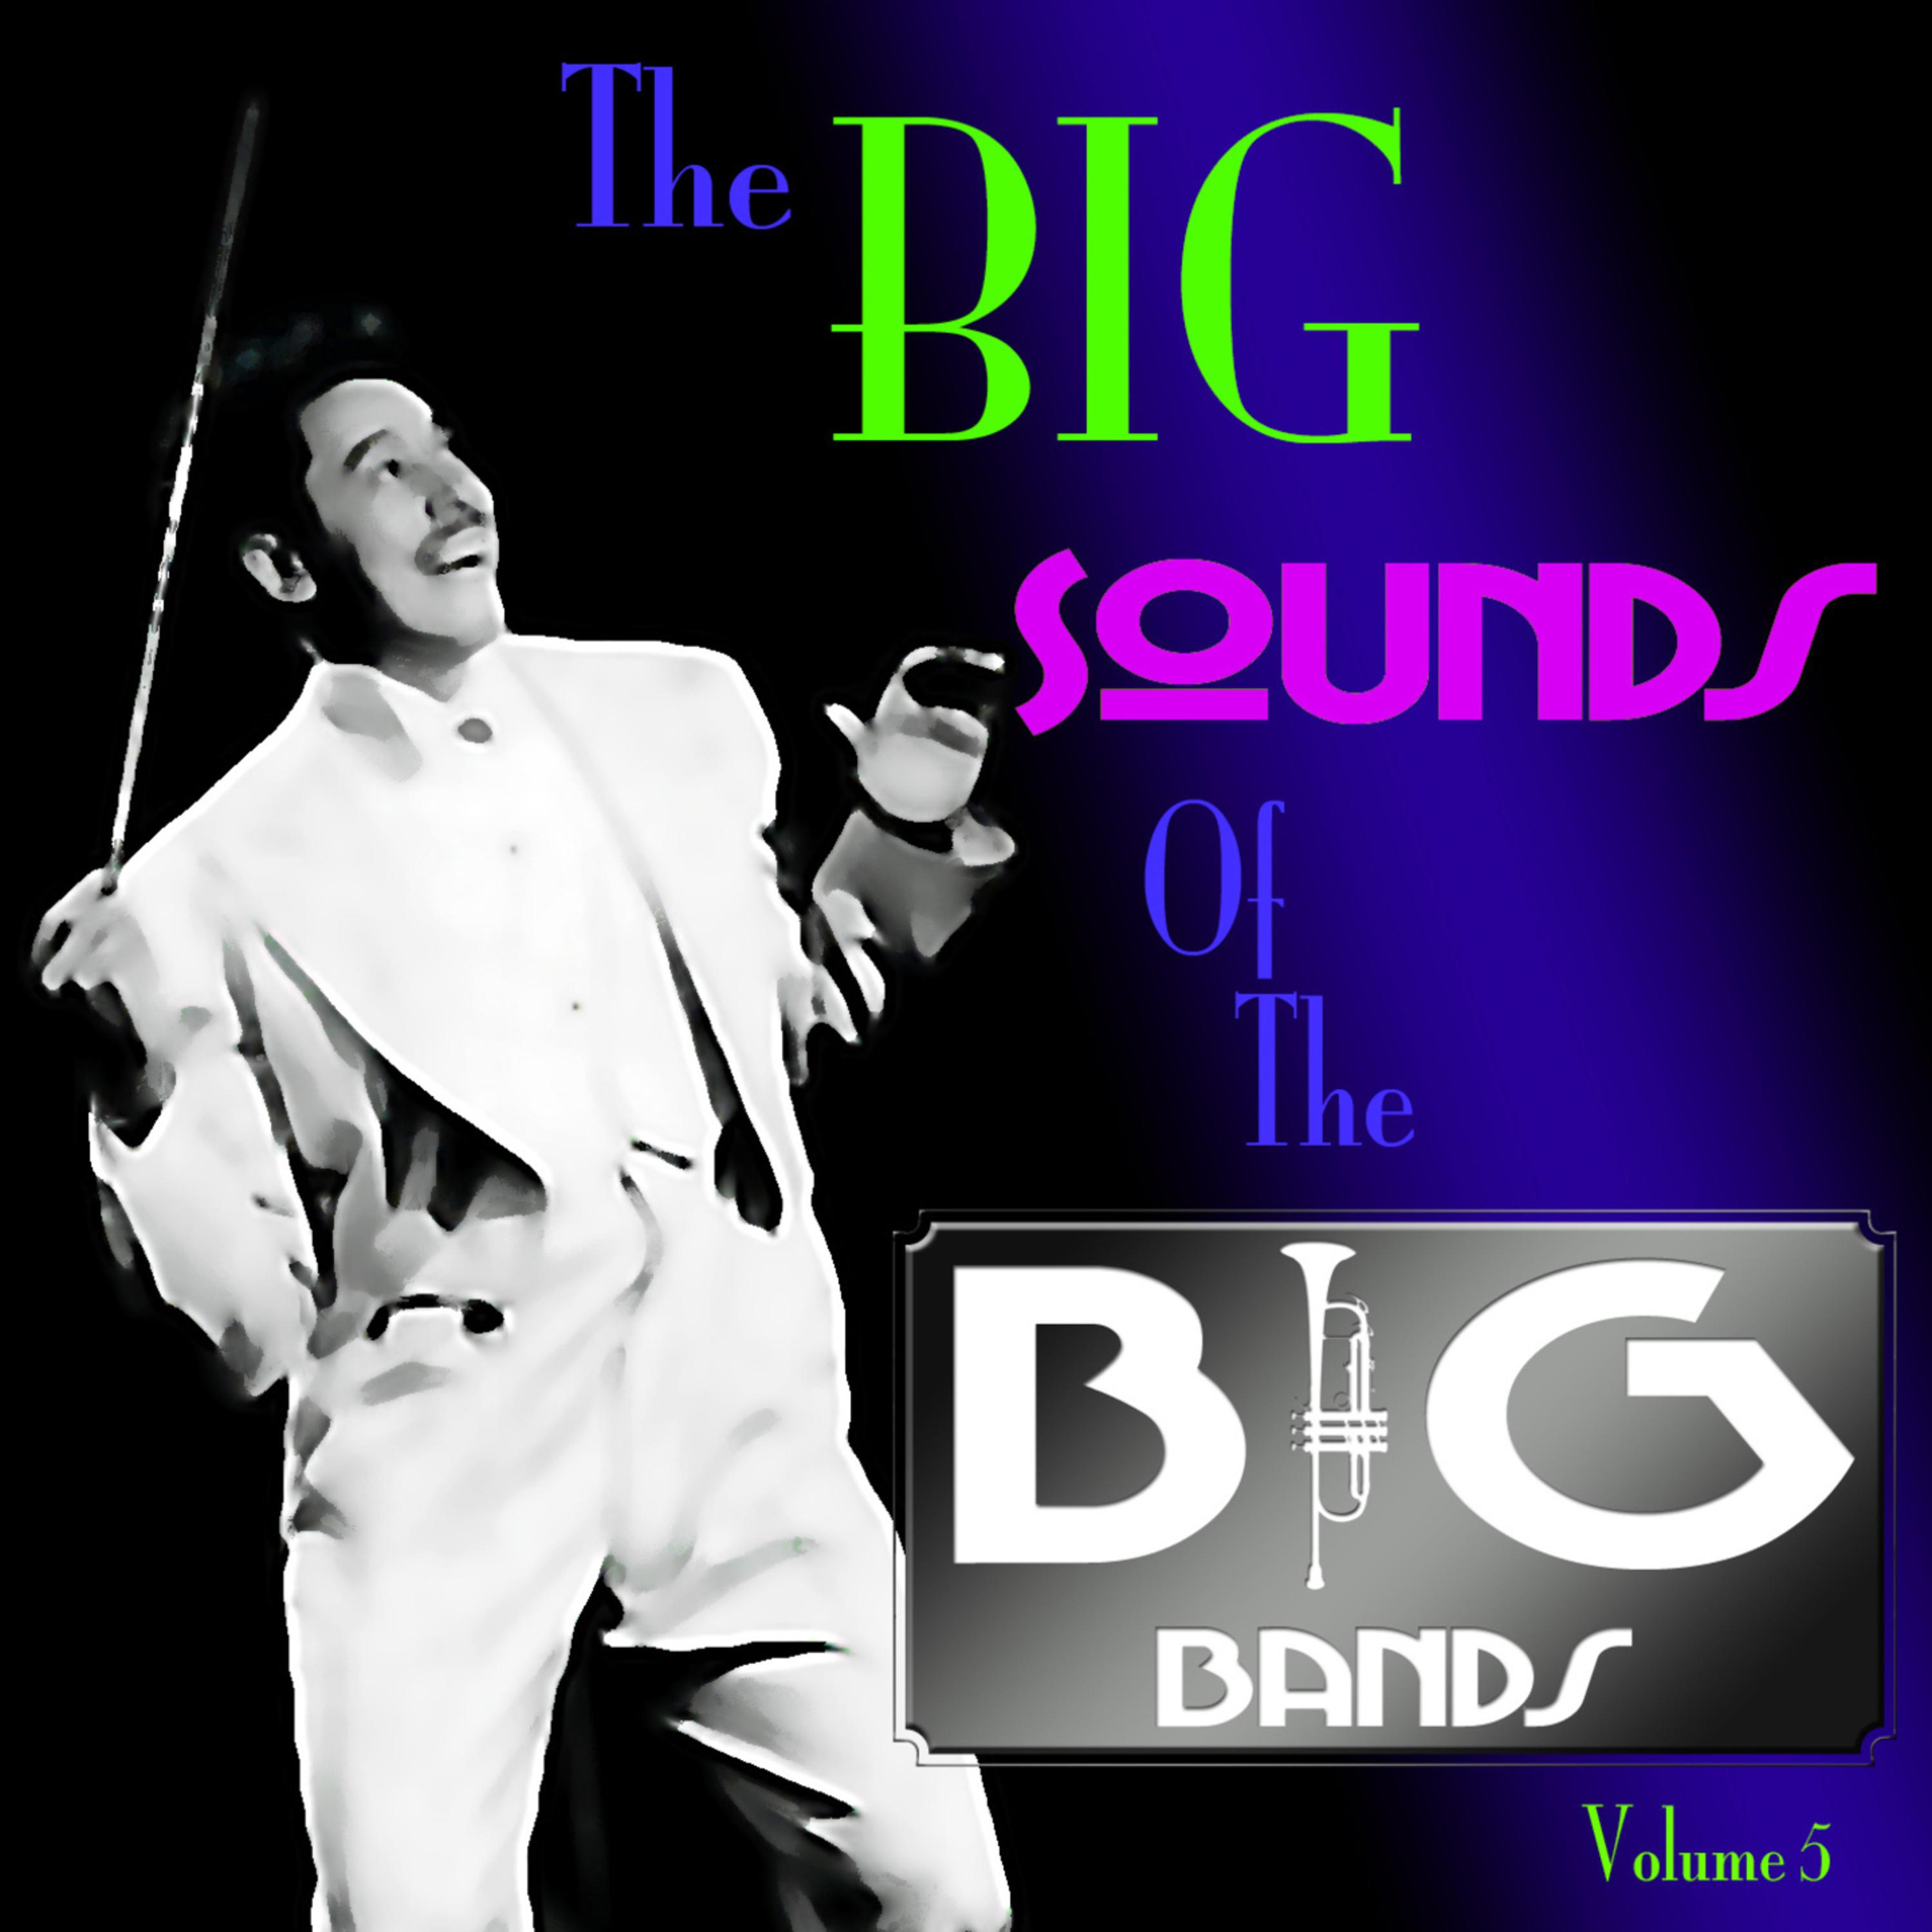 The Big Sound Of The Big Bands Volume 5